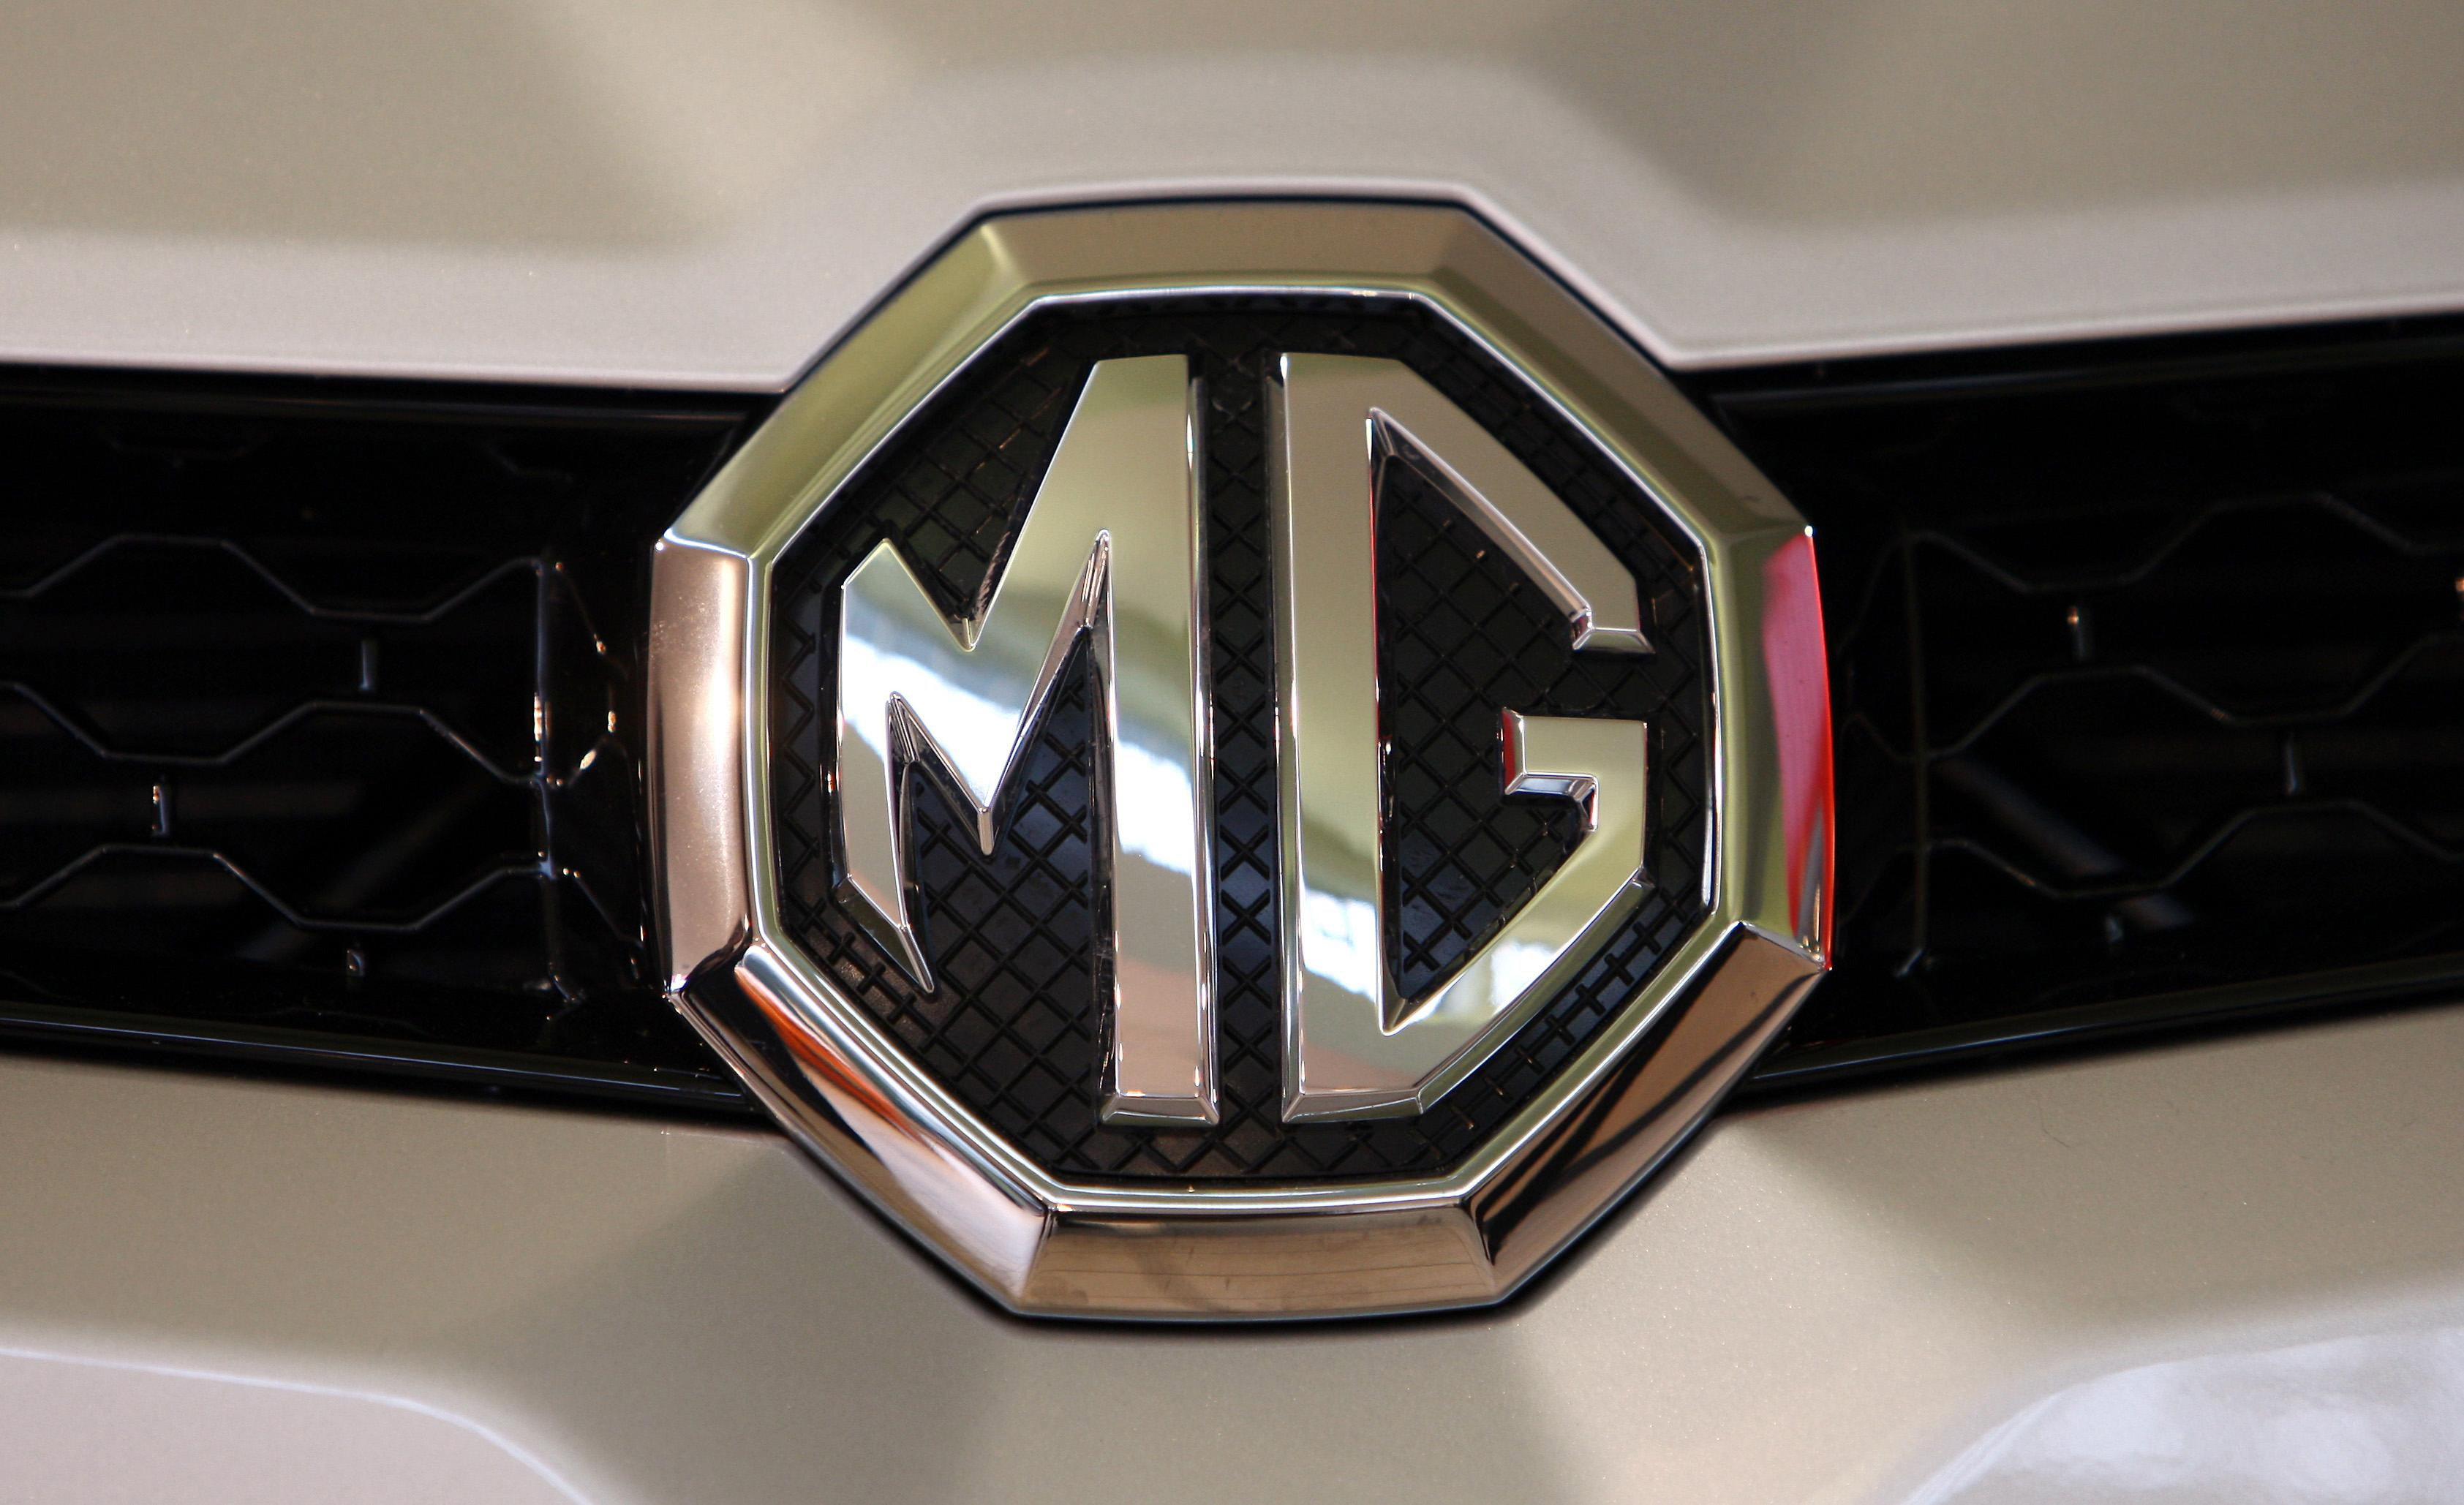 MG Logo on the front of a car